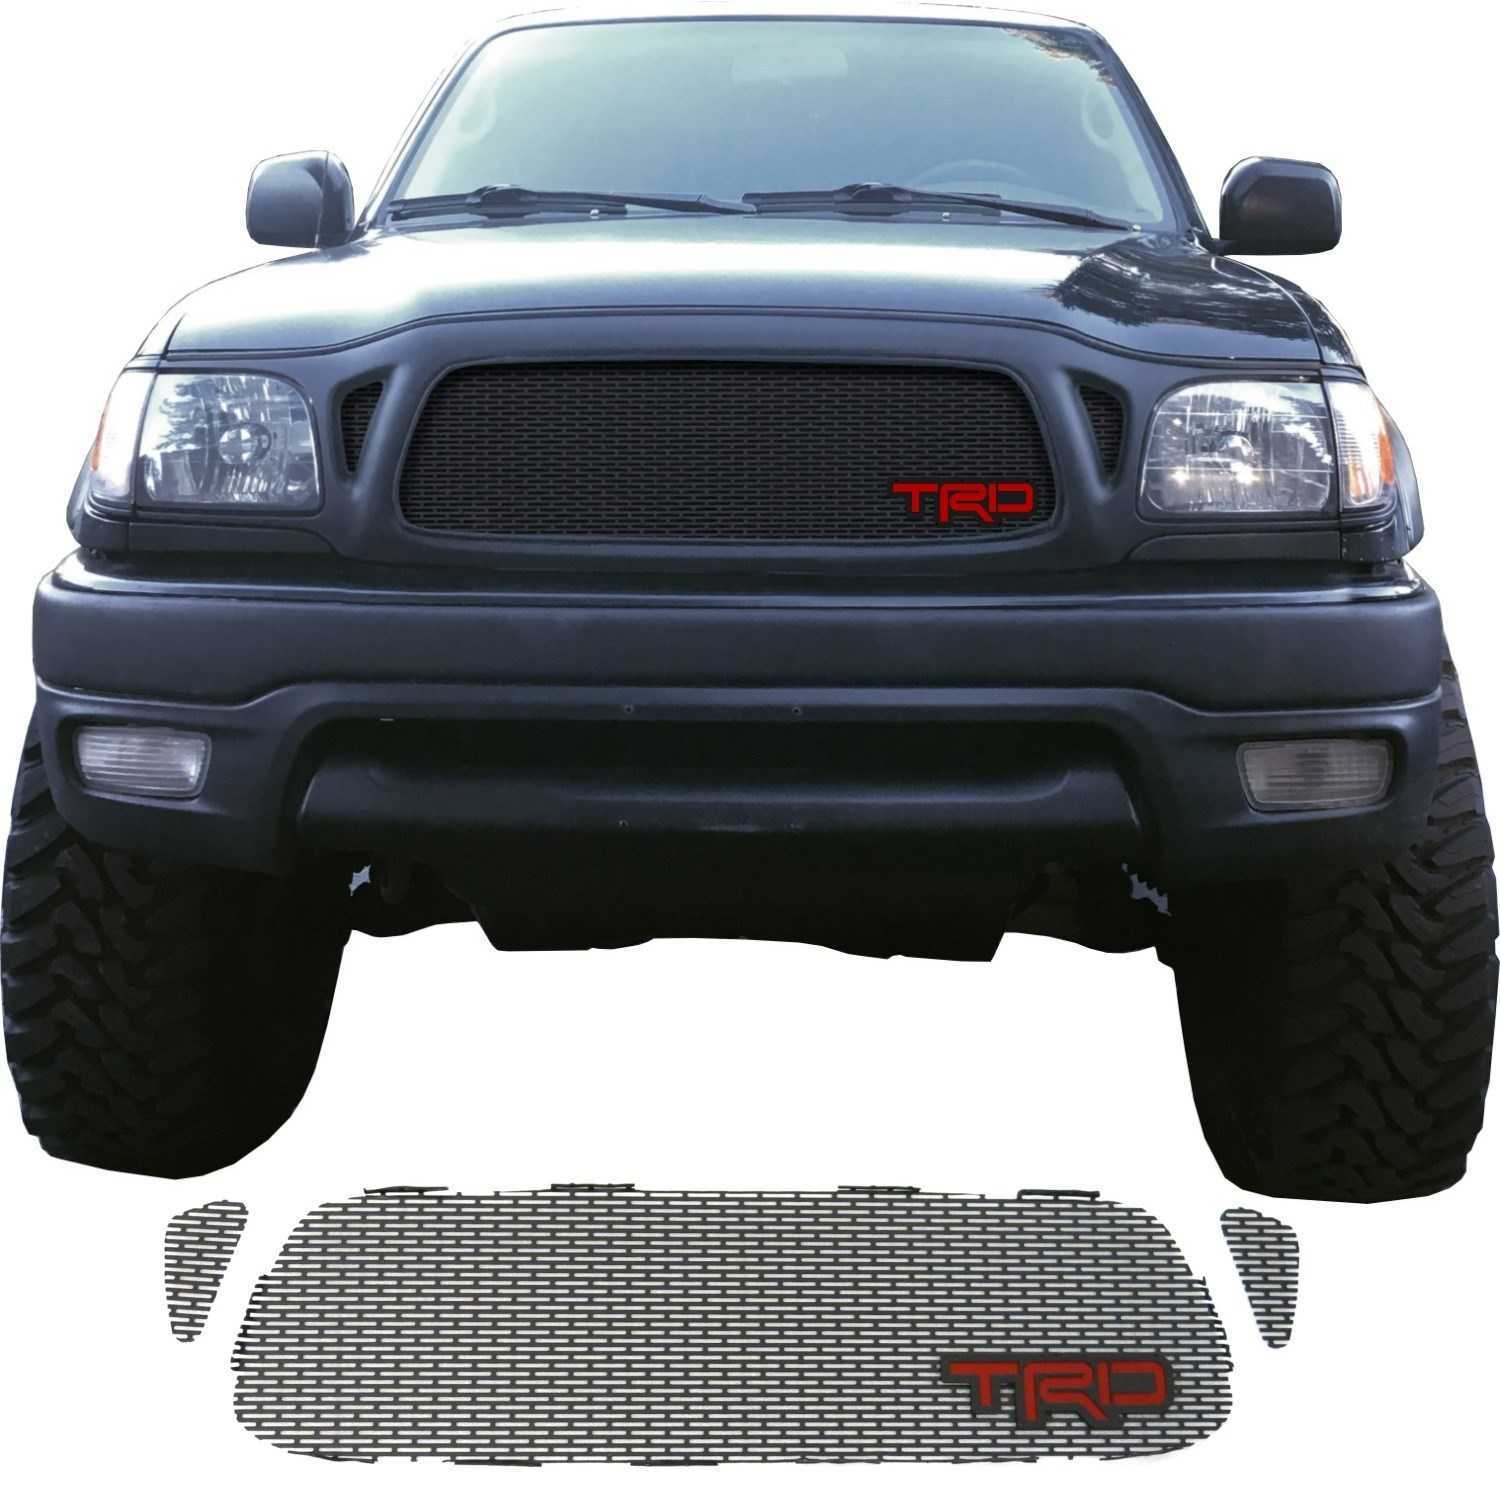 2001-04 Toyota Tacoma Grill Mesh With TRD Emblem